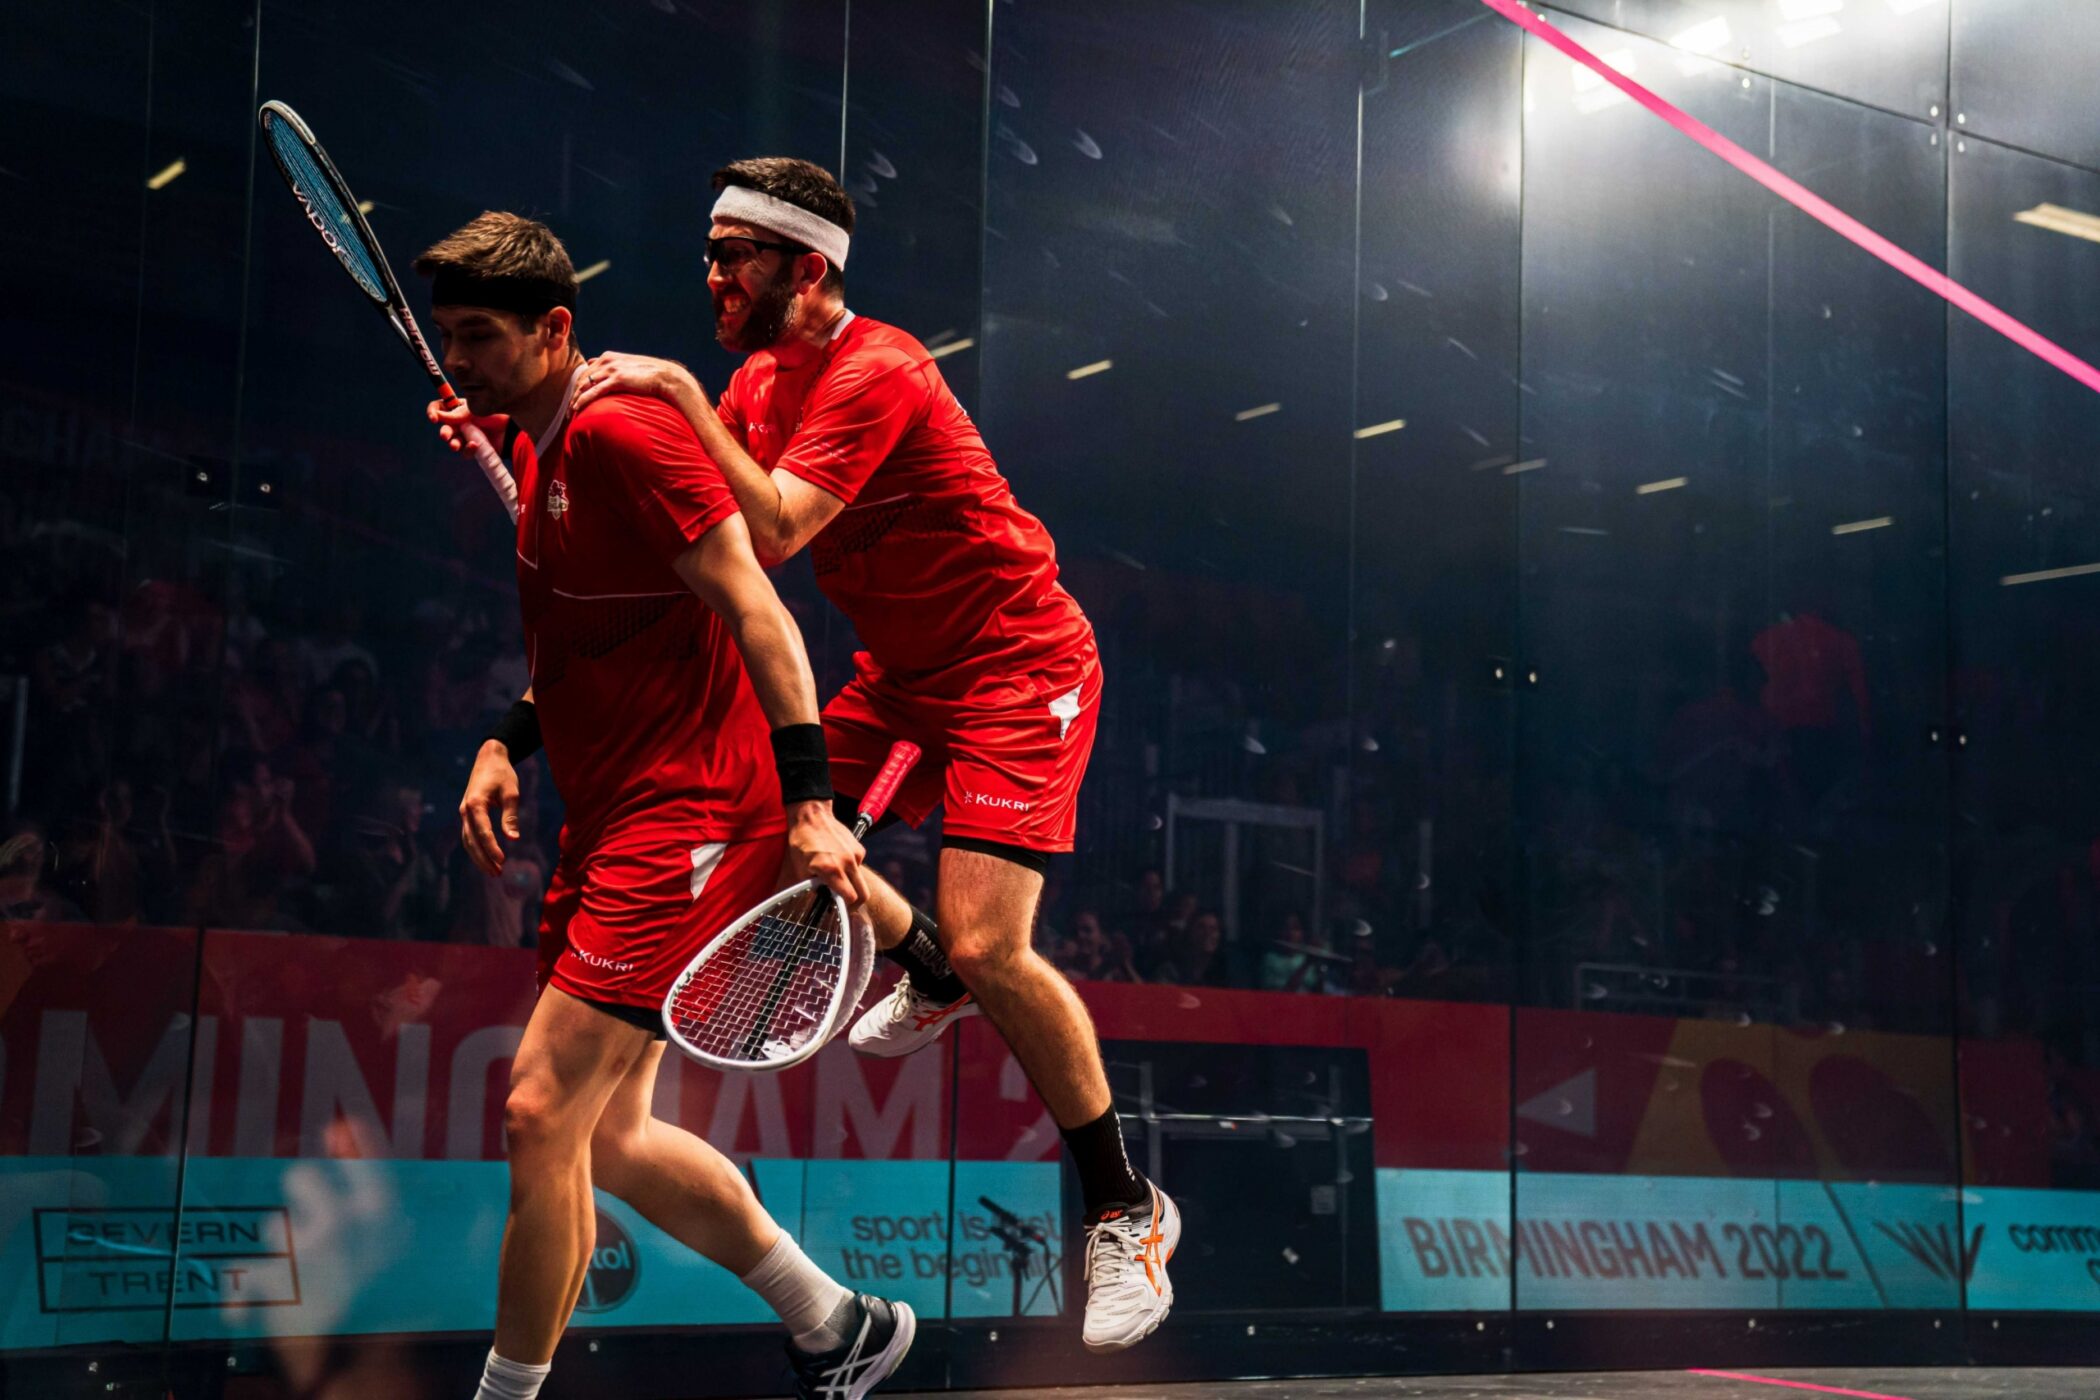 Daryl Selby & Adrian Waller Commonwealth Games 2022